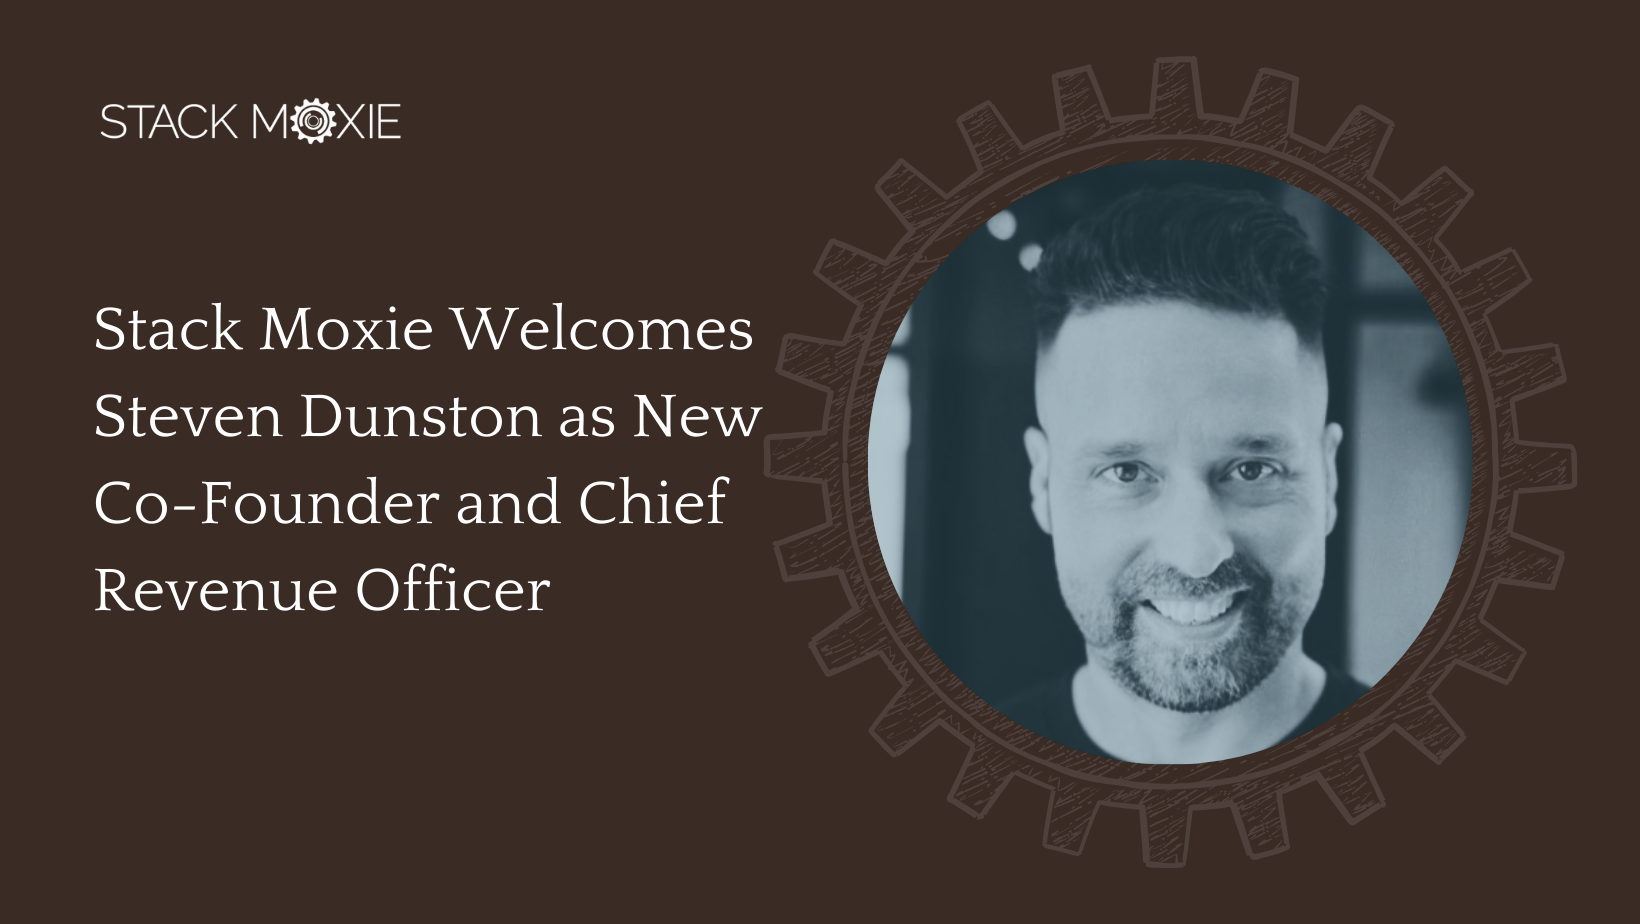 image and text: Stack Moxie Welcomes Steven Dunston